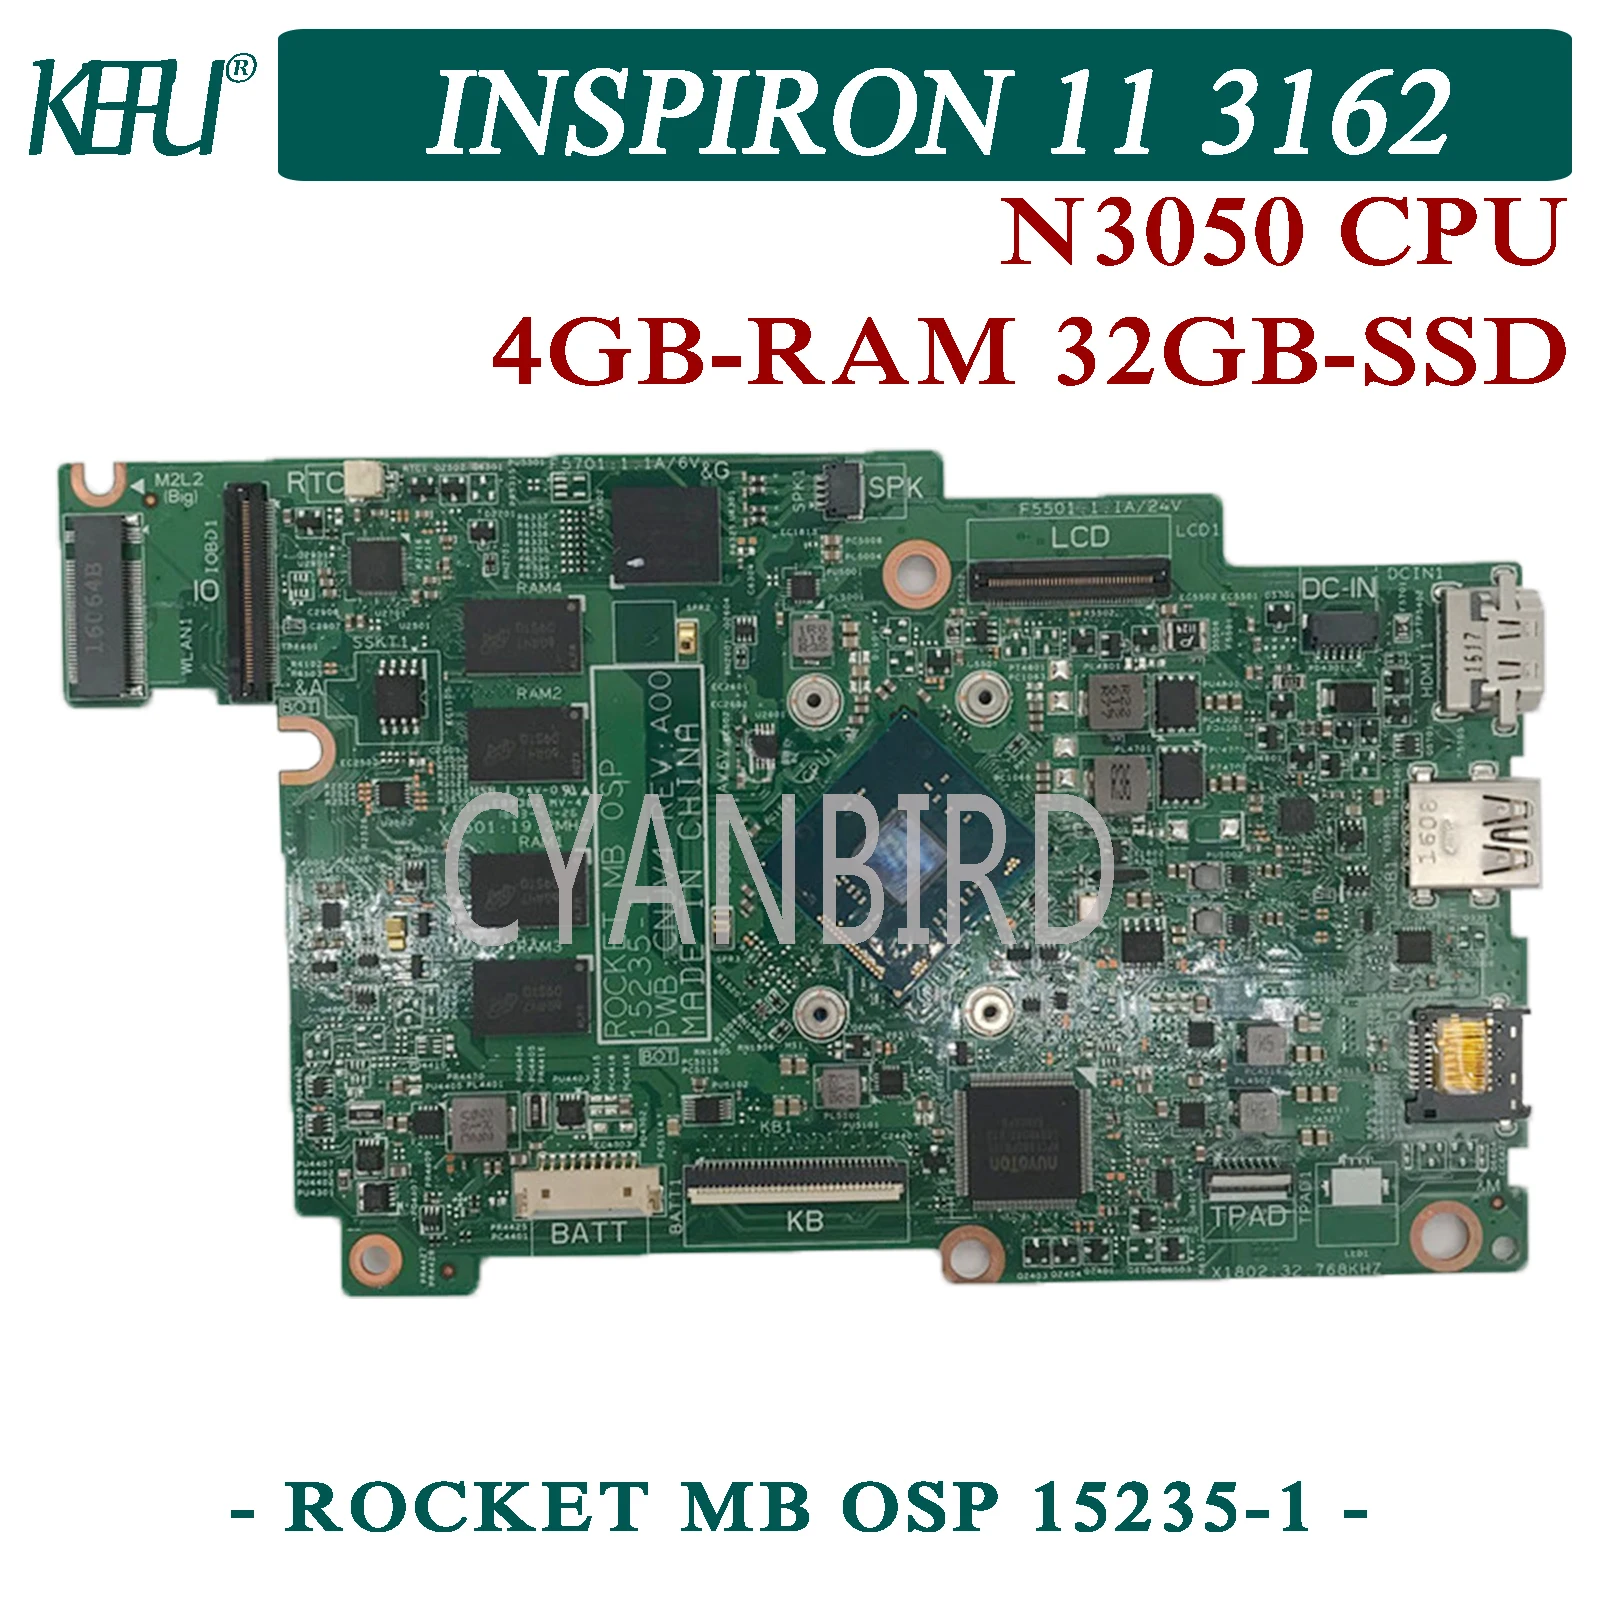 KEFU ROCKET MB OSP 15235-1 original mainboard for Dell Inspiron 11-3162 with 4GB-RAM N3050 CPU 32GB-SSD Laptop motherboard